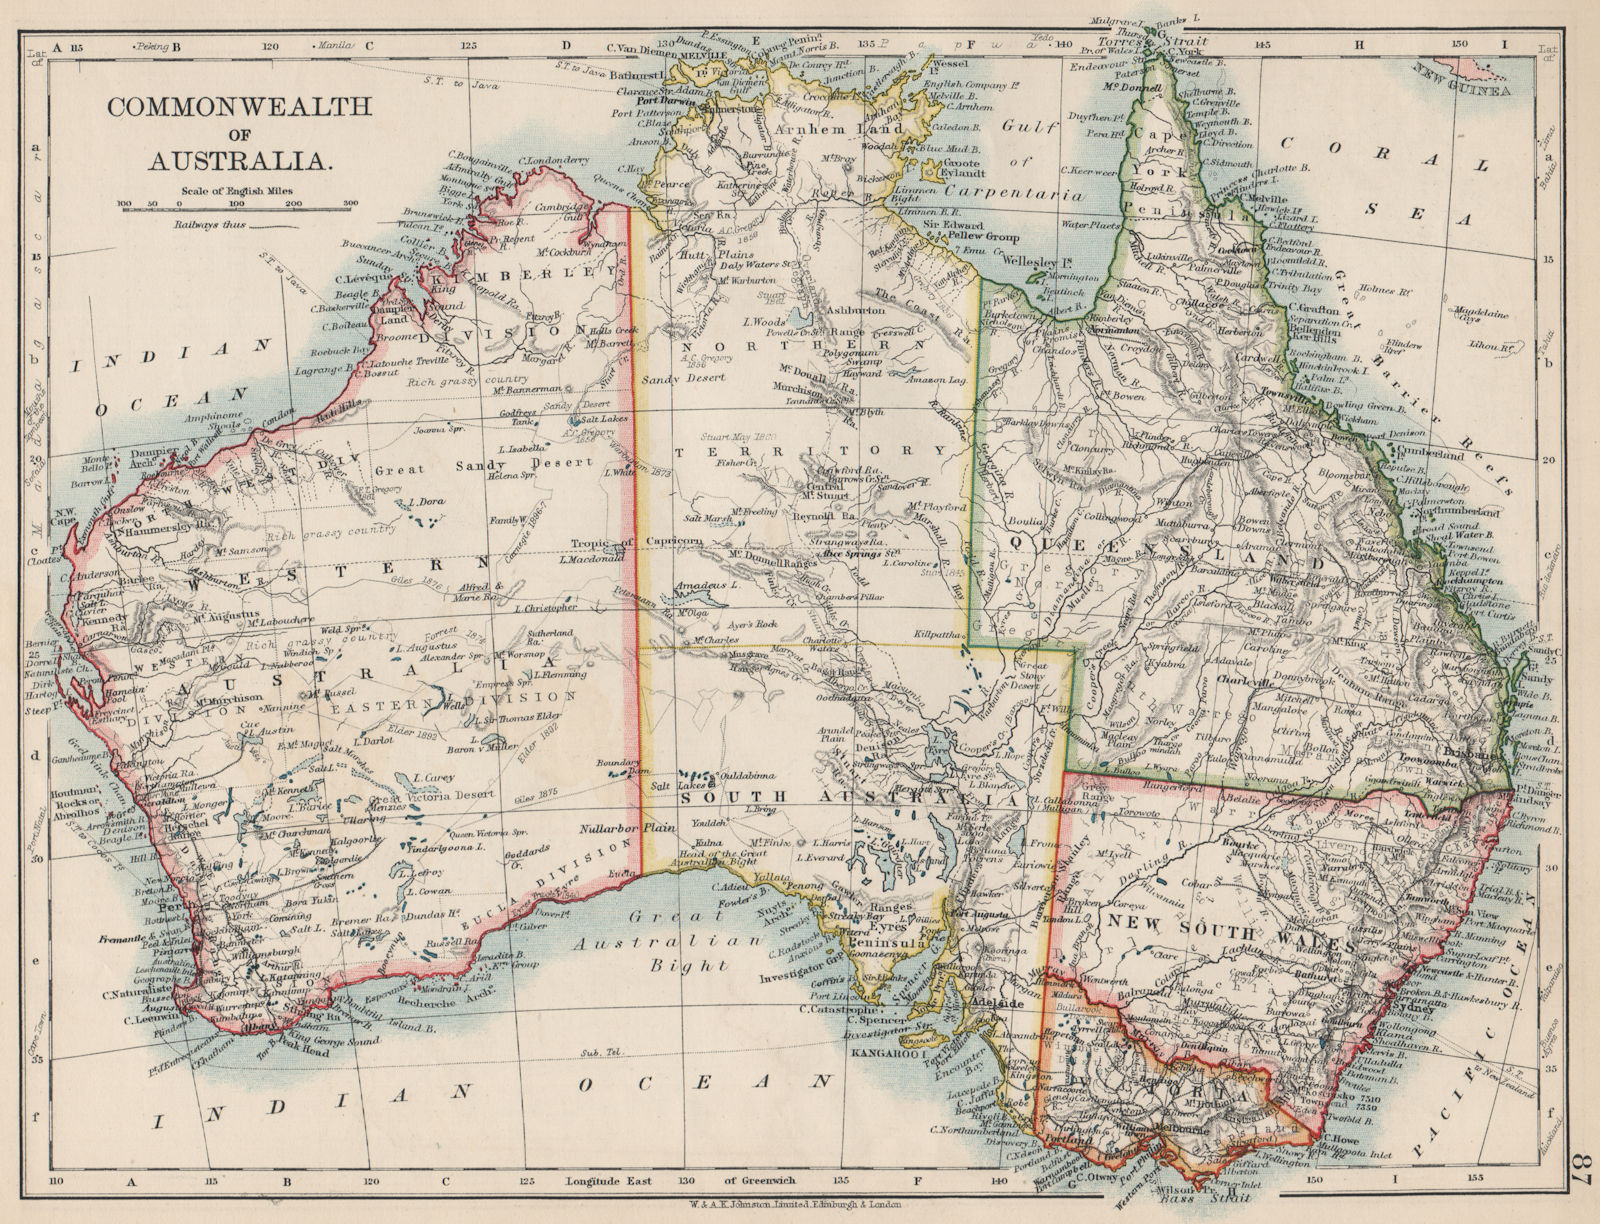 AUSTRALIA. States. Showing Northern Territory within SA. JOHNSTON 1903 old map